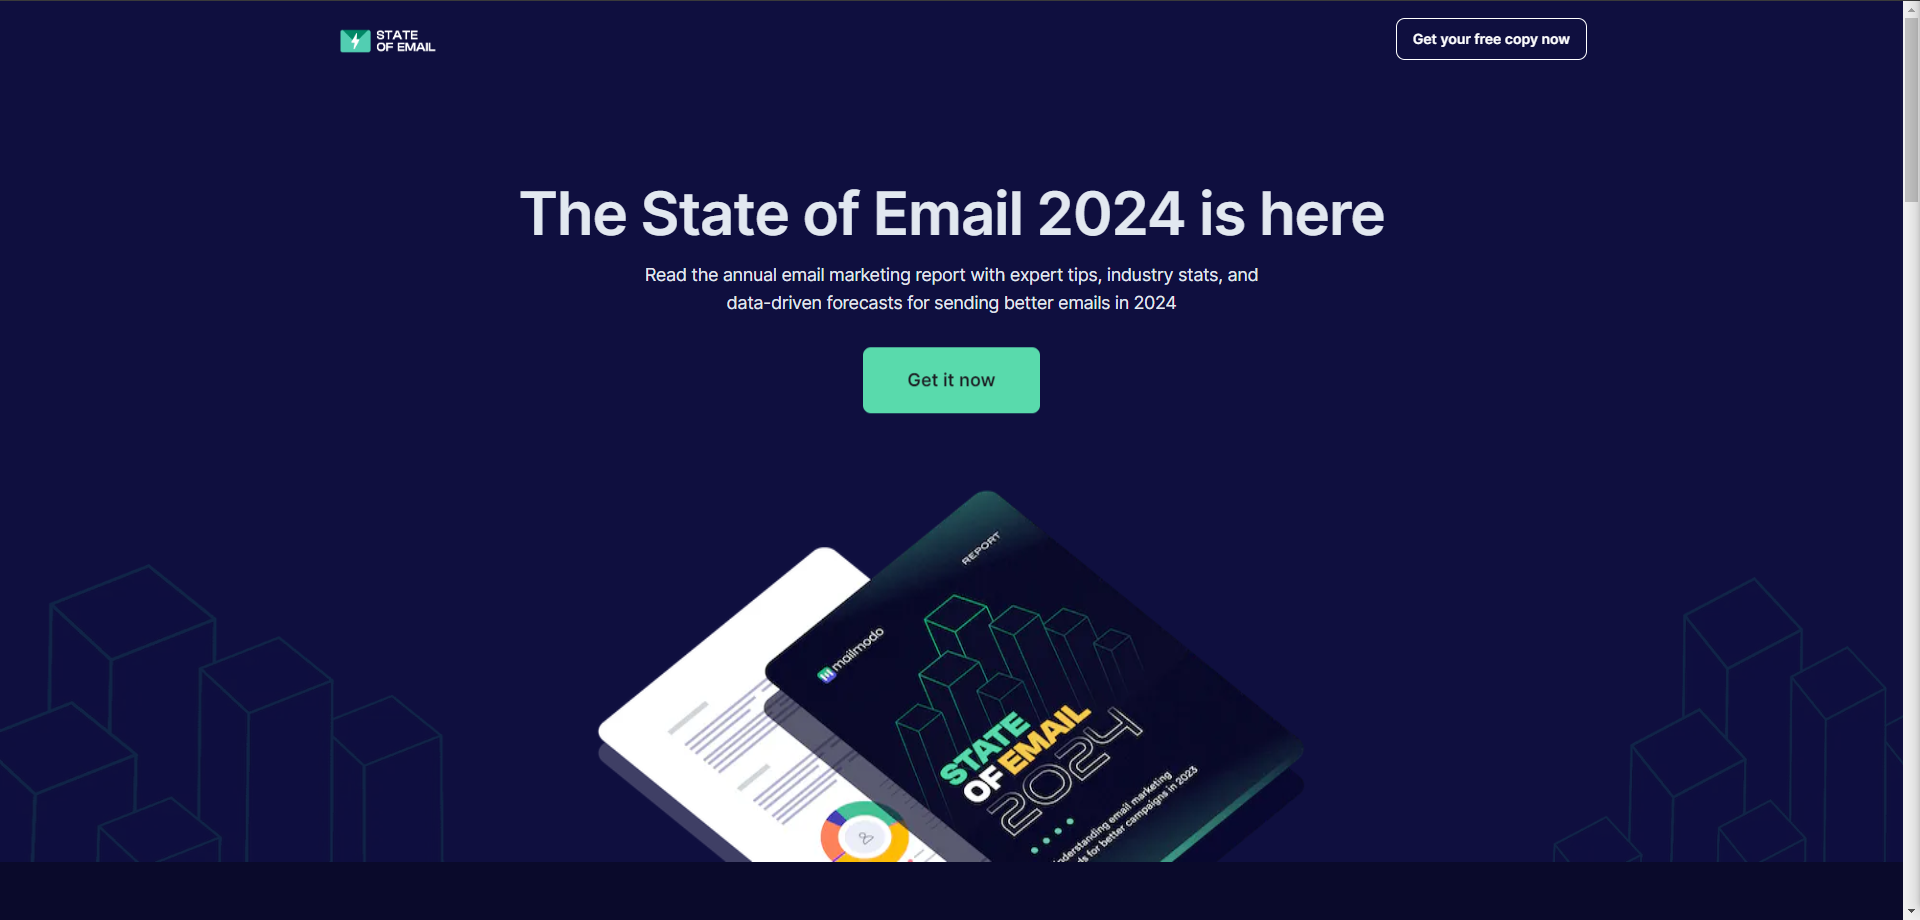 State of Email 2024